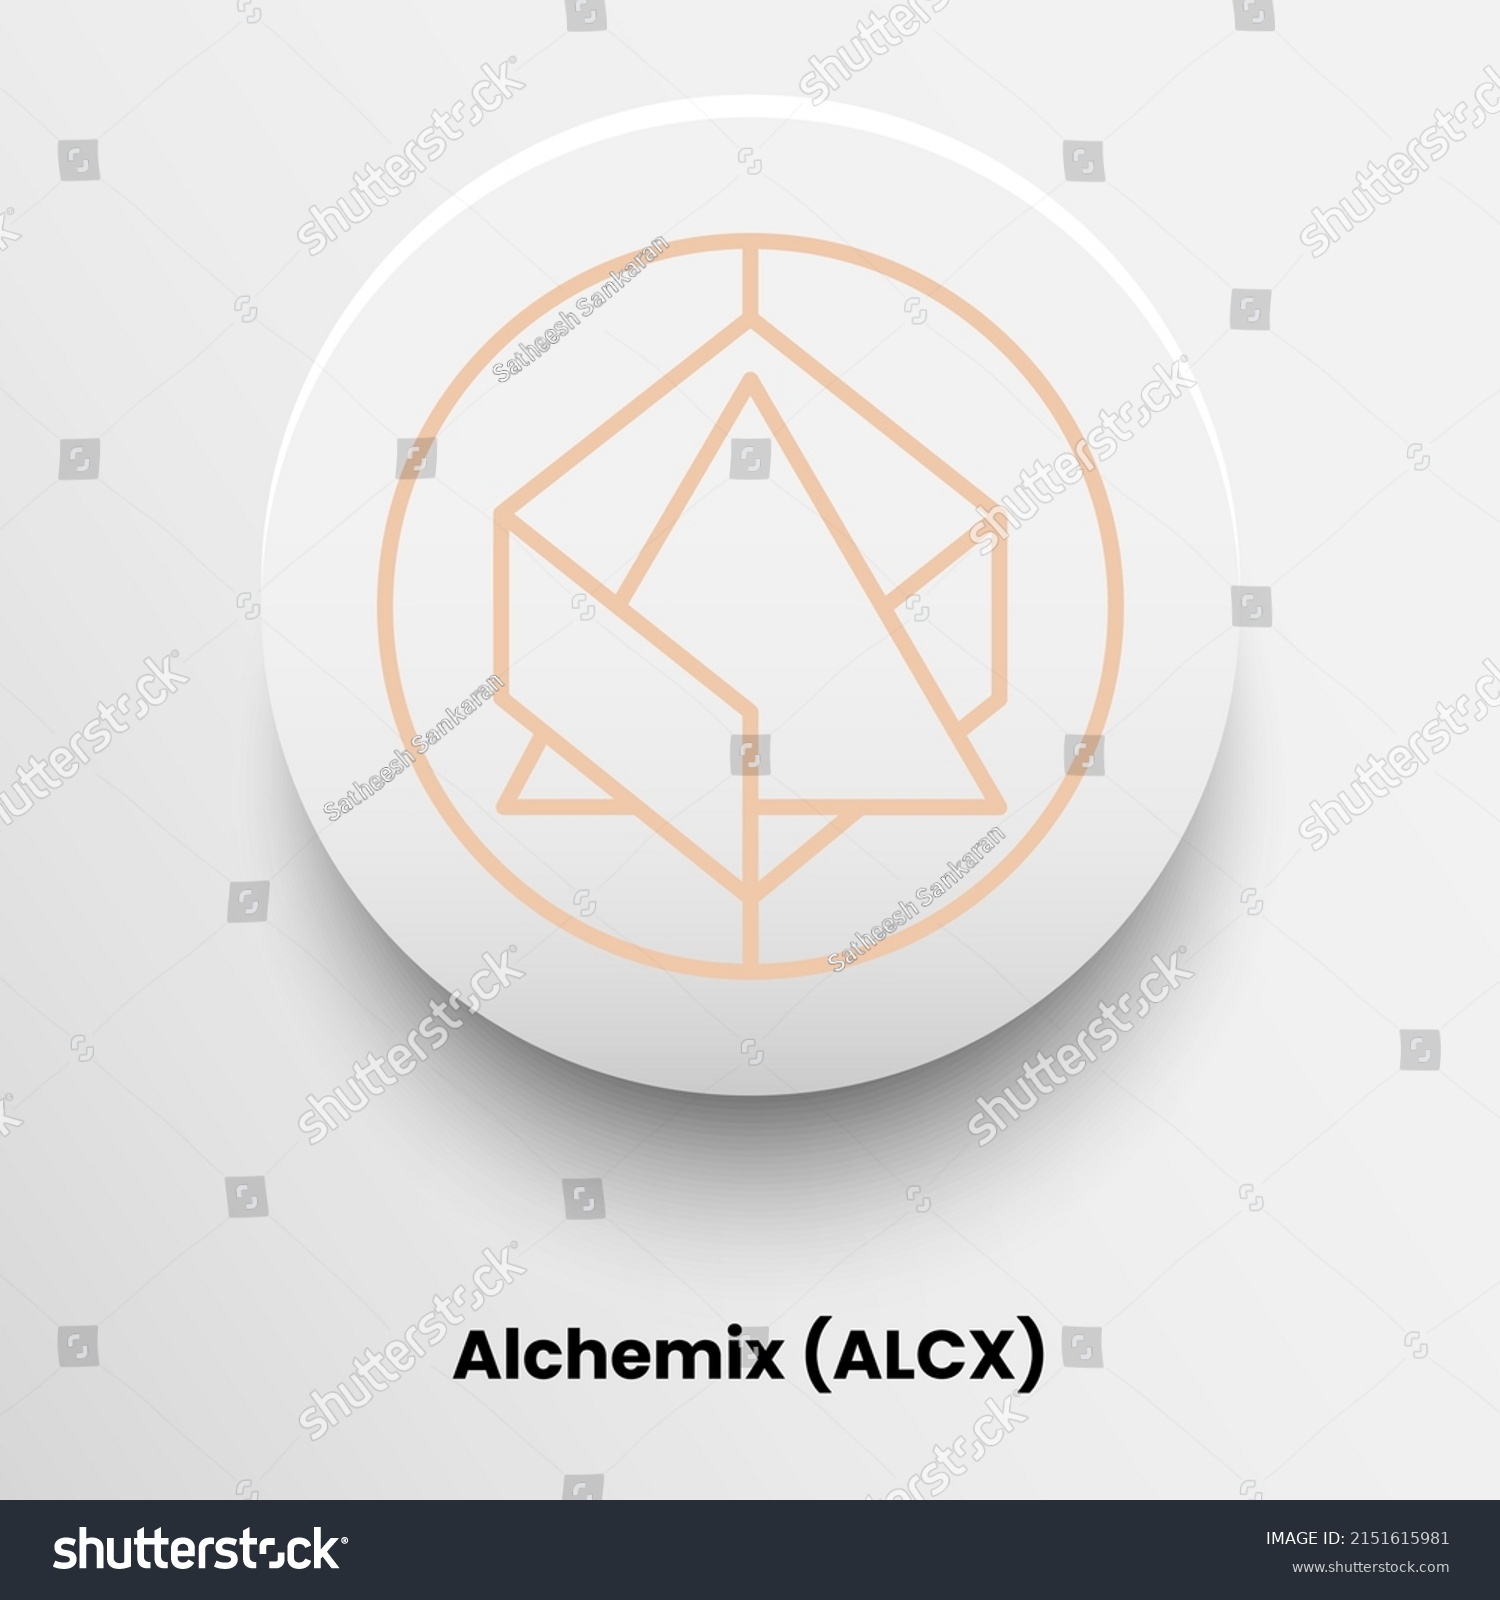 SVG of Creative block chain based crypto currency Alchemix (ALCX) logo vector illustration design. Can be used as icon, badge, label, symbol, sticker and print background template svg